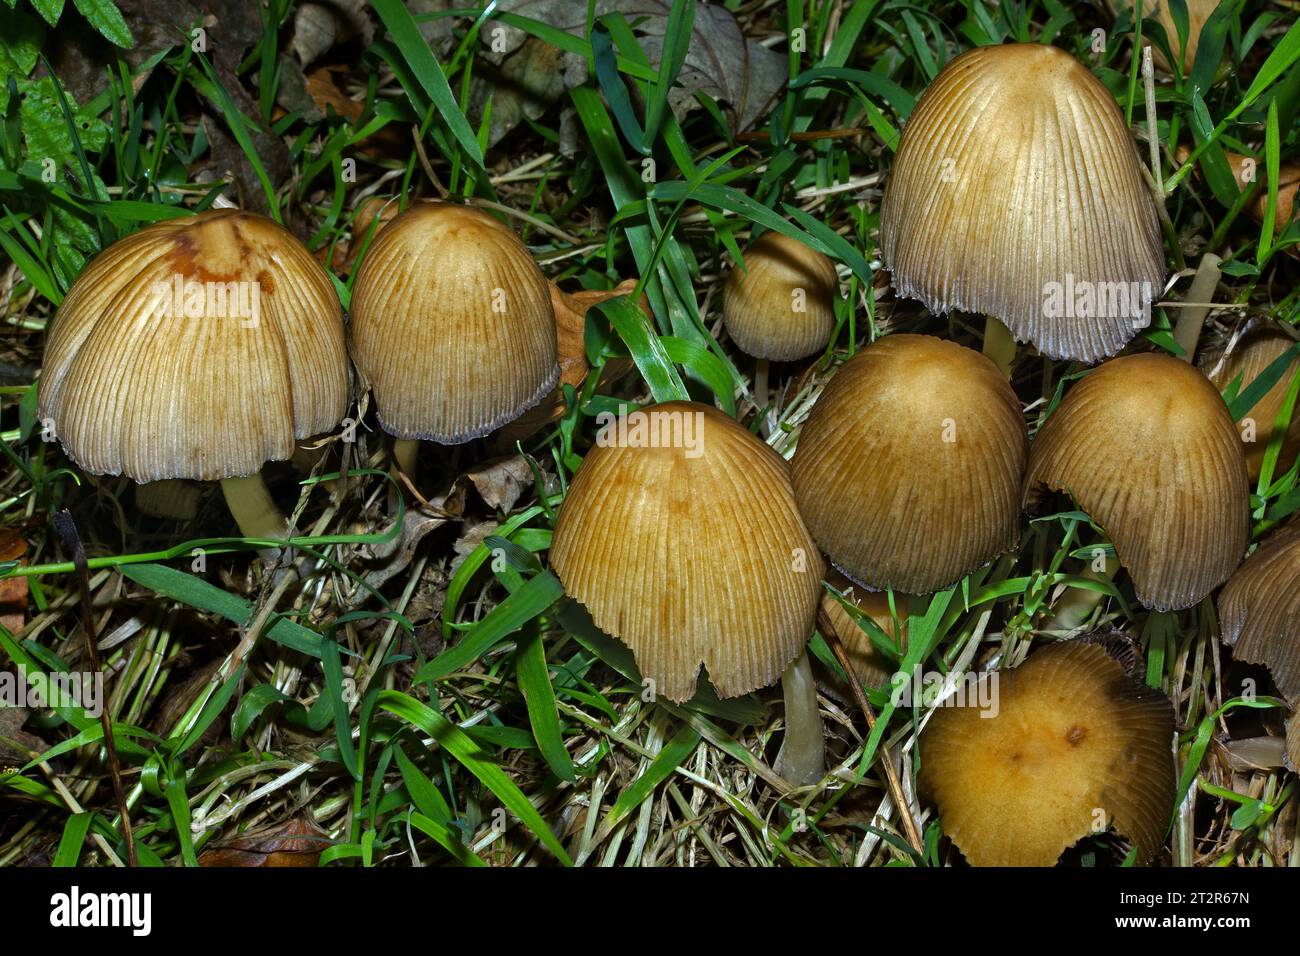 Coprinellus cf impatiens was found under beech trees in North Wales. This inkcap fungus occurs throughout Europe and parts of North America. Stock Photo